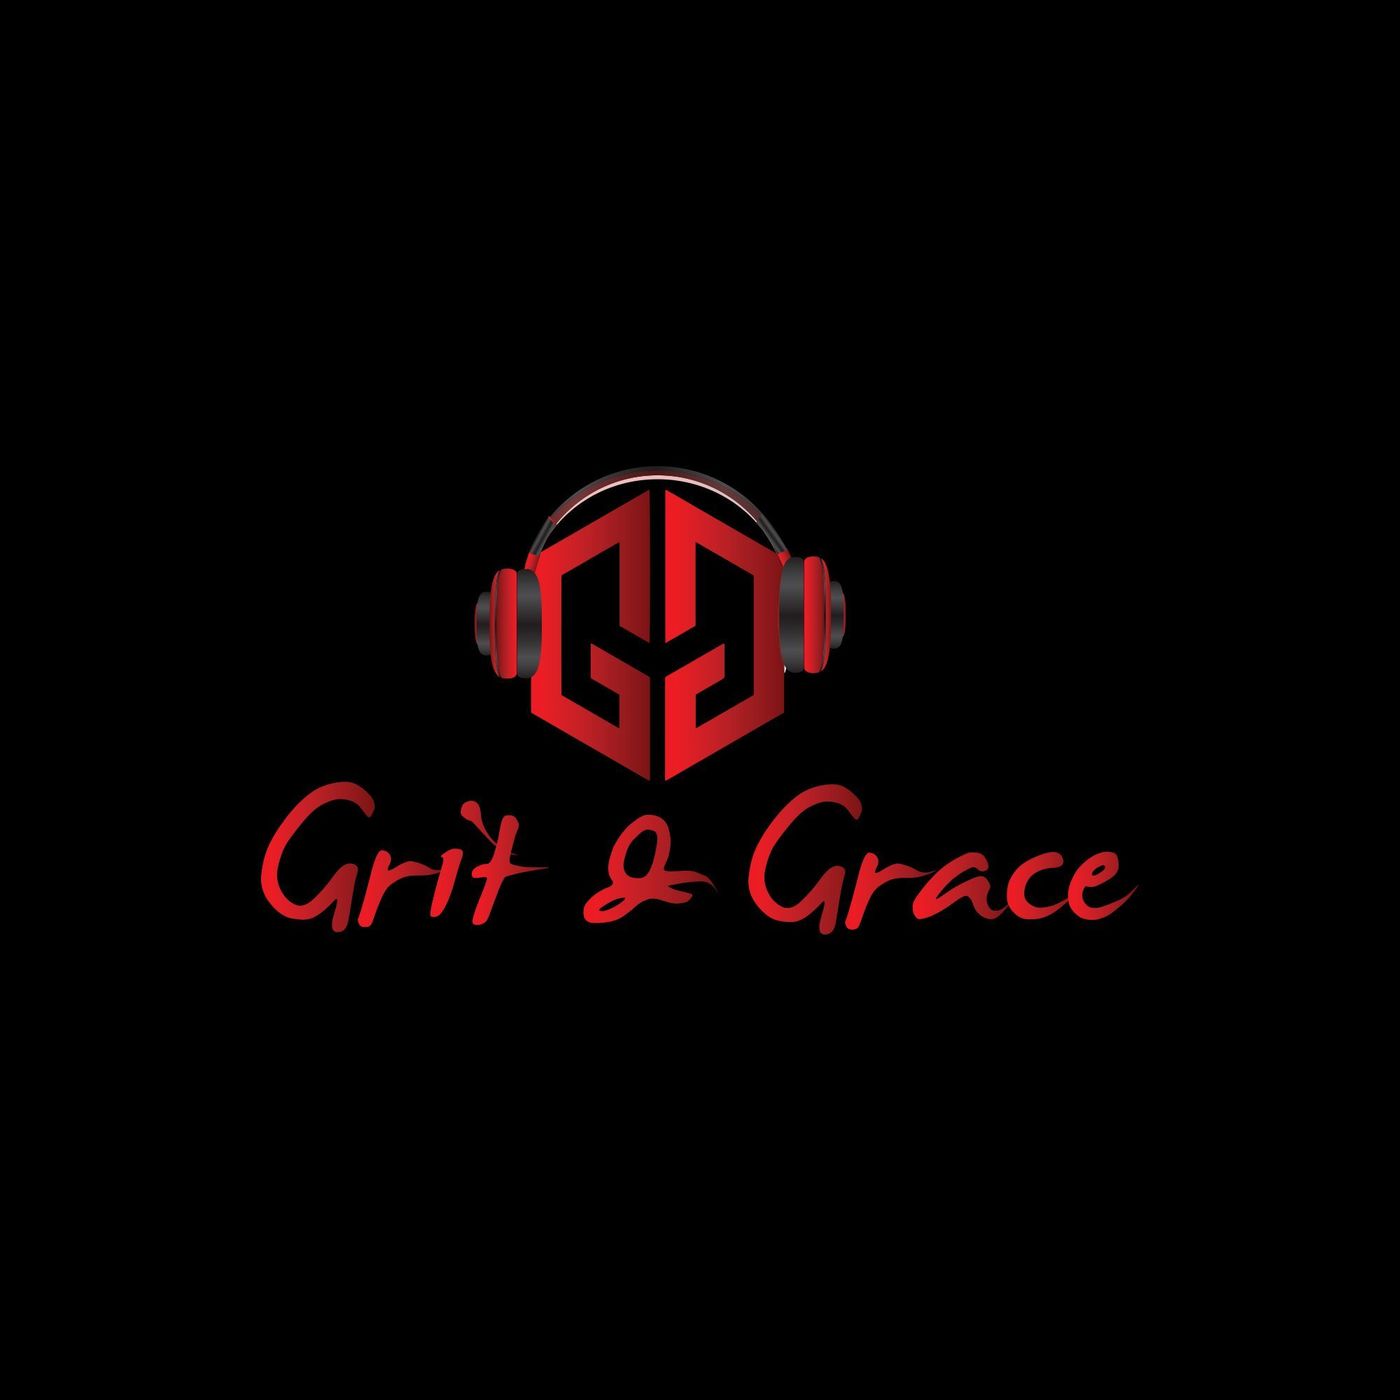 Grit and Grace: The Risk Free Life is a Reward Free Life